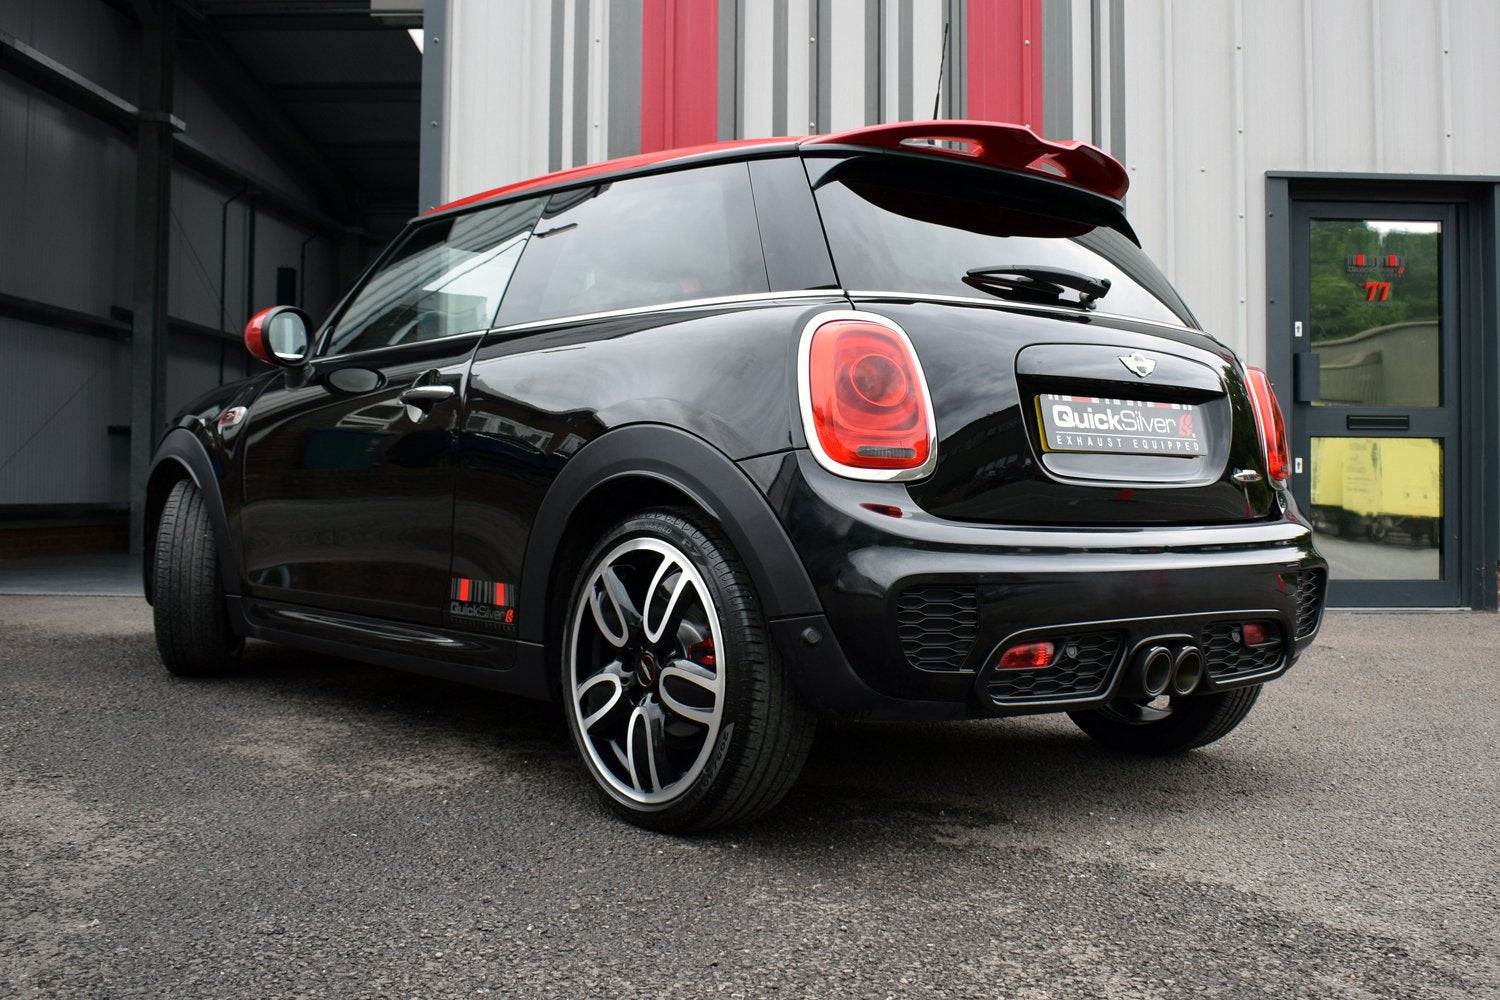 MINI Cooper S 2.0 3 Door and 5 Door inc. JCW (F56, F55) - Sport System with Sound Architect (2014 on)